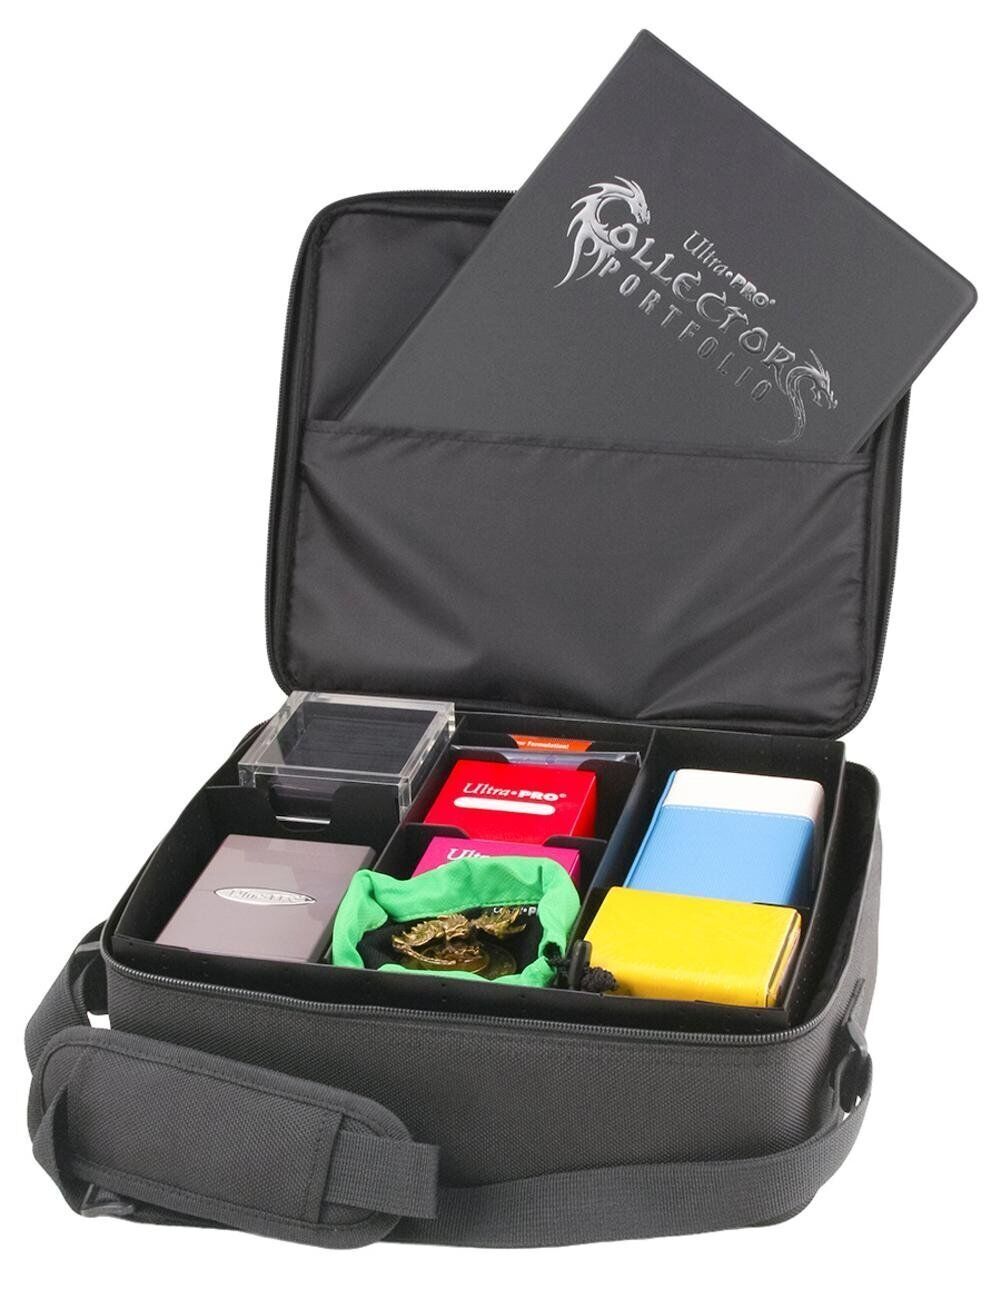 Ultra Pro - Deluxe Gaming Case